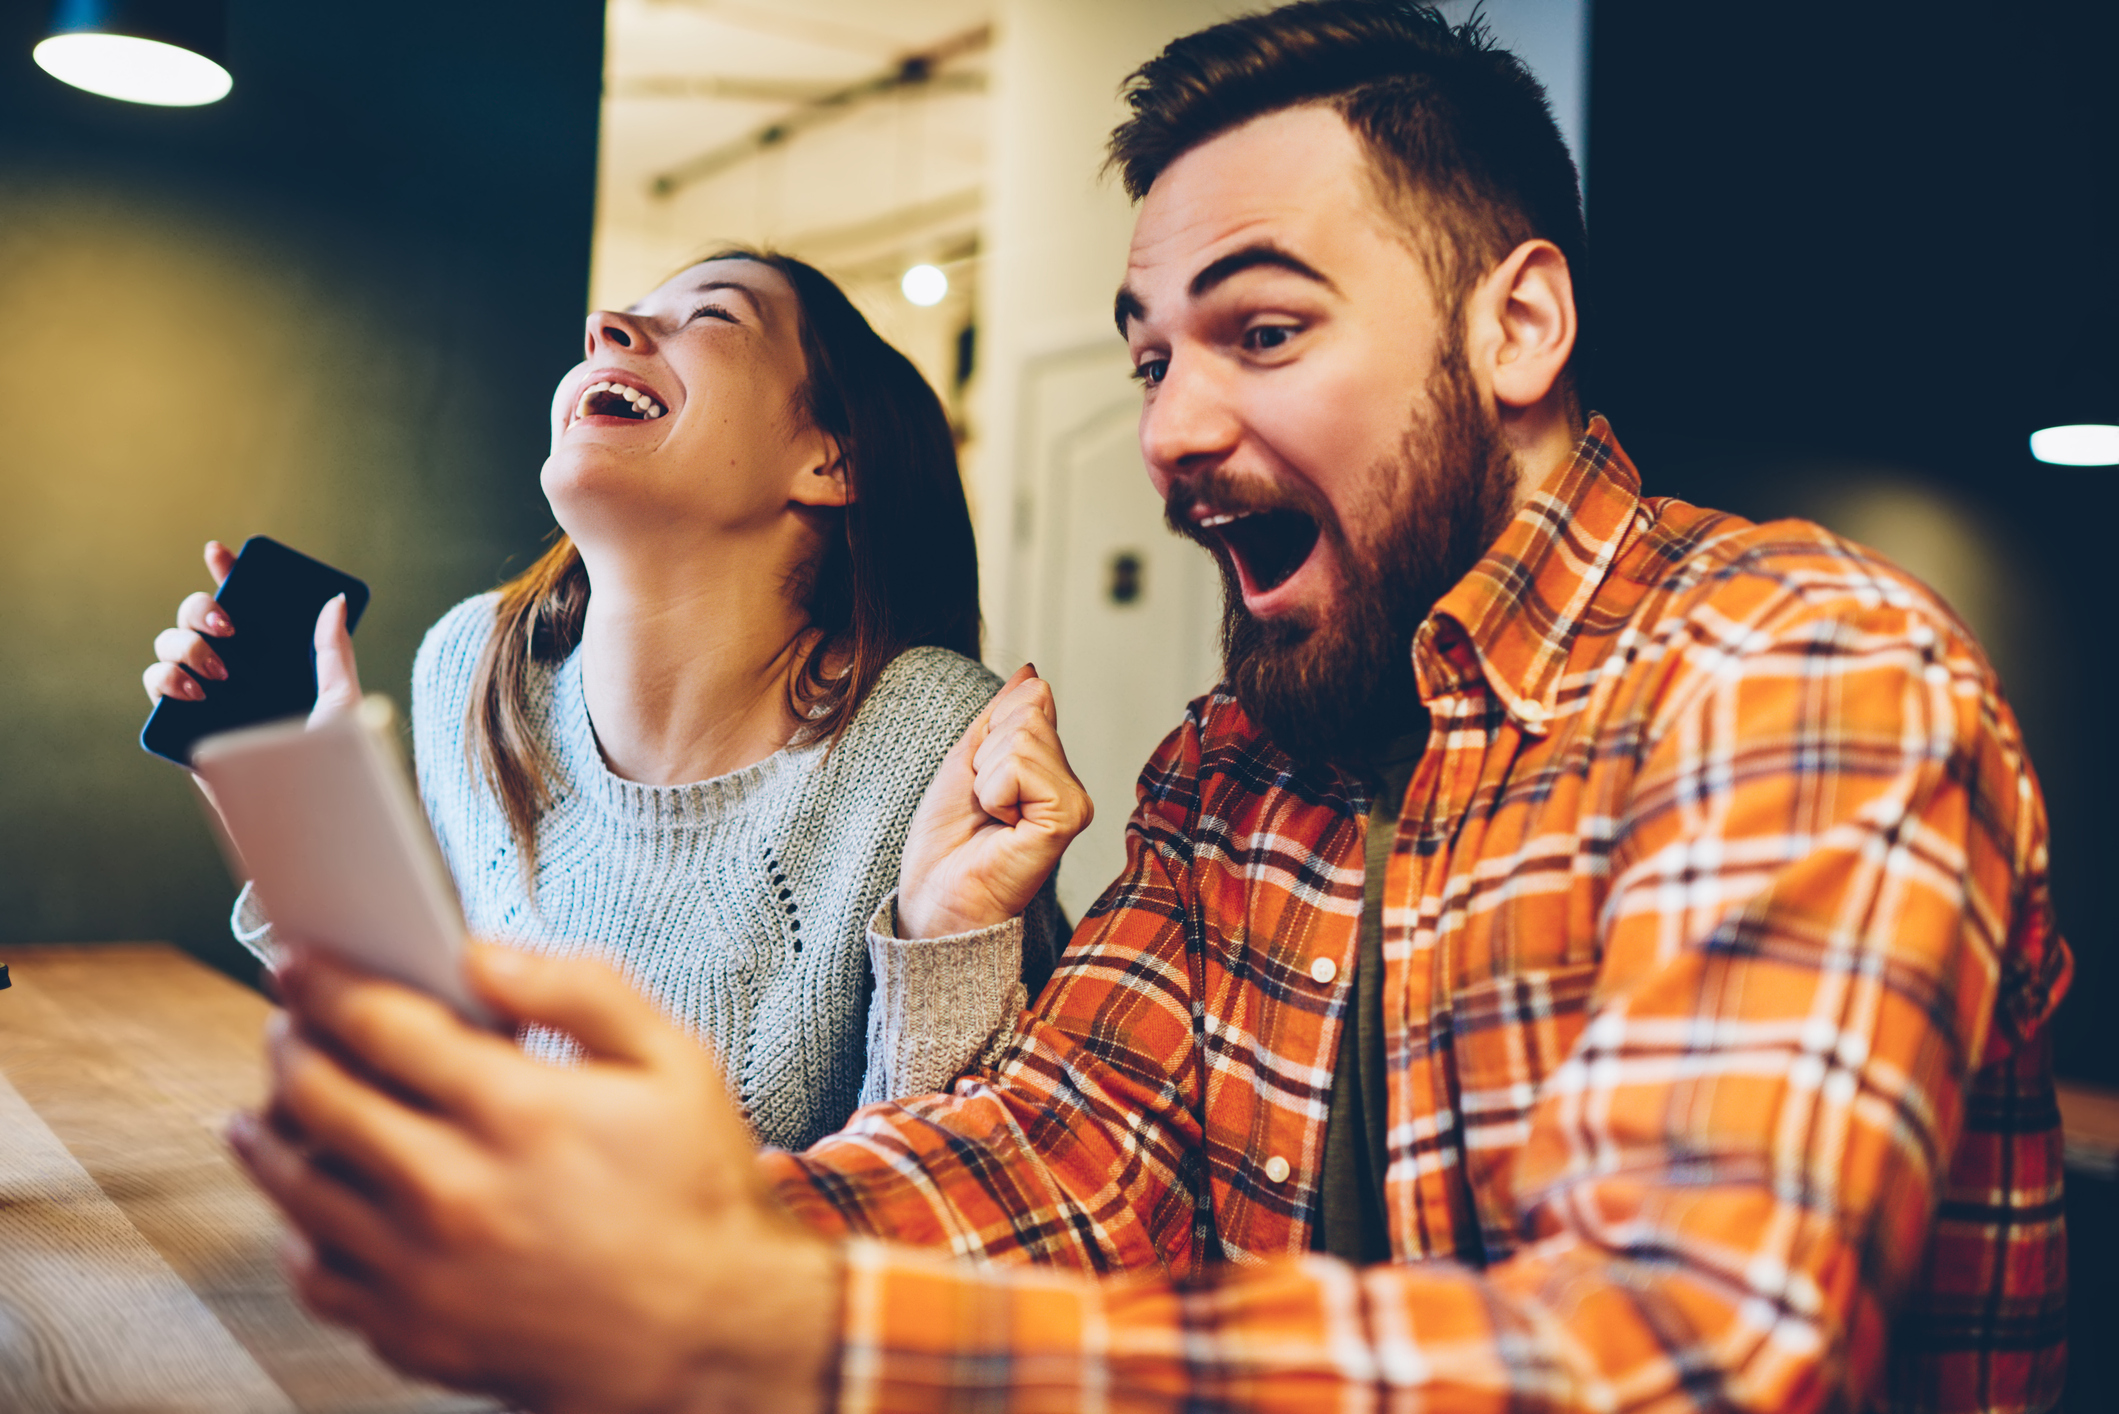 Stock image of a man and woman sitting together and laughing while looking at their cell phone screens.